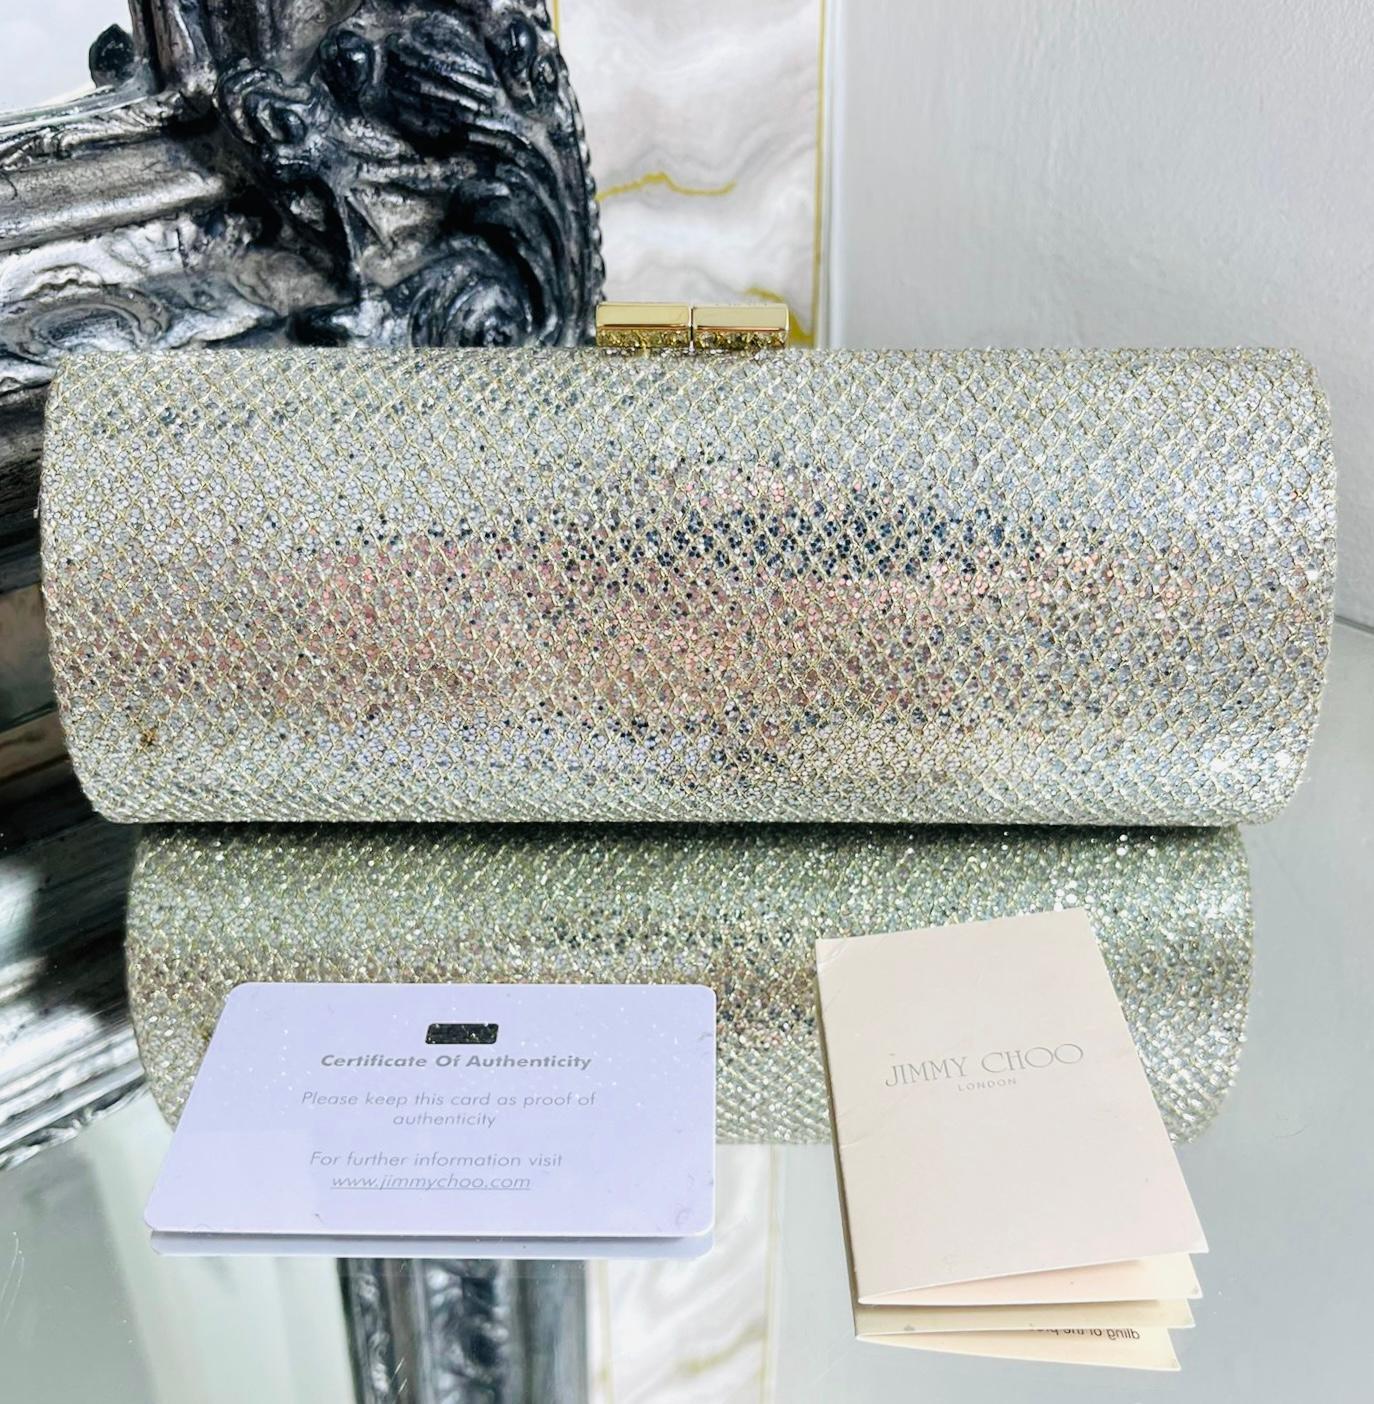 Jimmy Choo Tube Glitter Clutch Bag

Champagne, tube shaped clutch bag designed in silver glitter with gold thread diamond stitching.

Featuring gold hardware and 'Jimmy Choo' logo engraved clasp closure leading to satin lined interior.

Size –